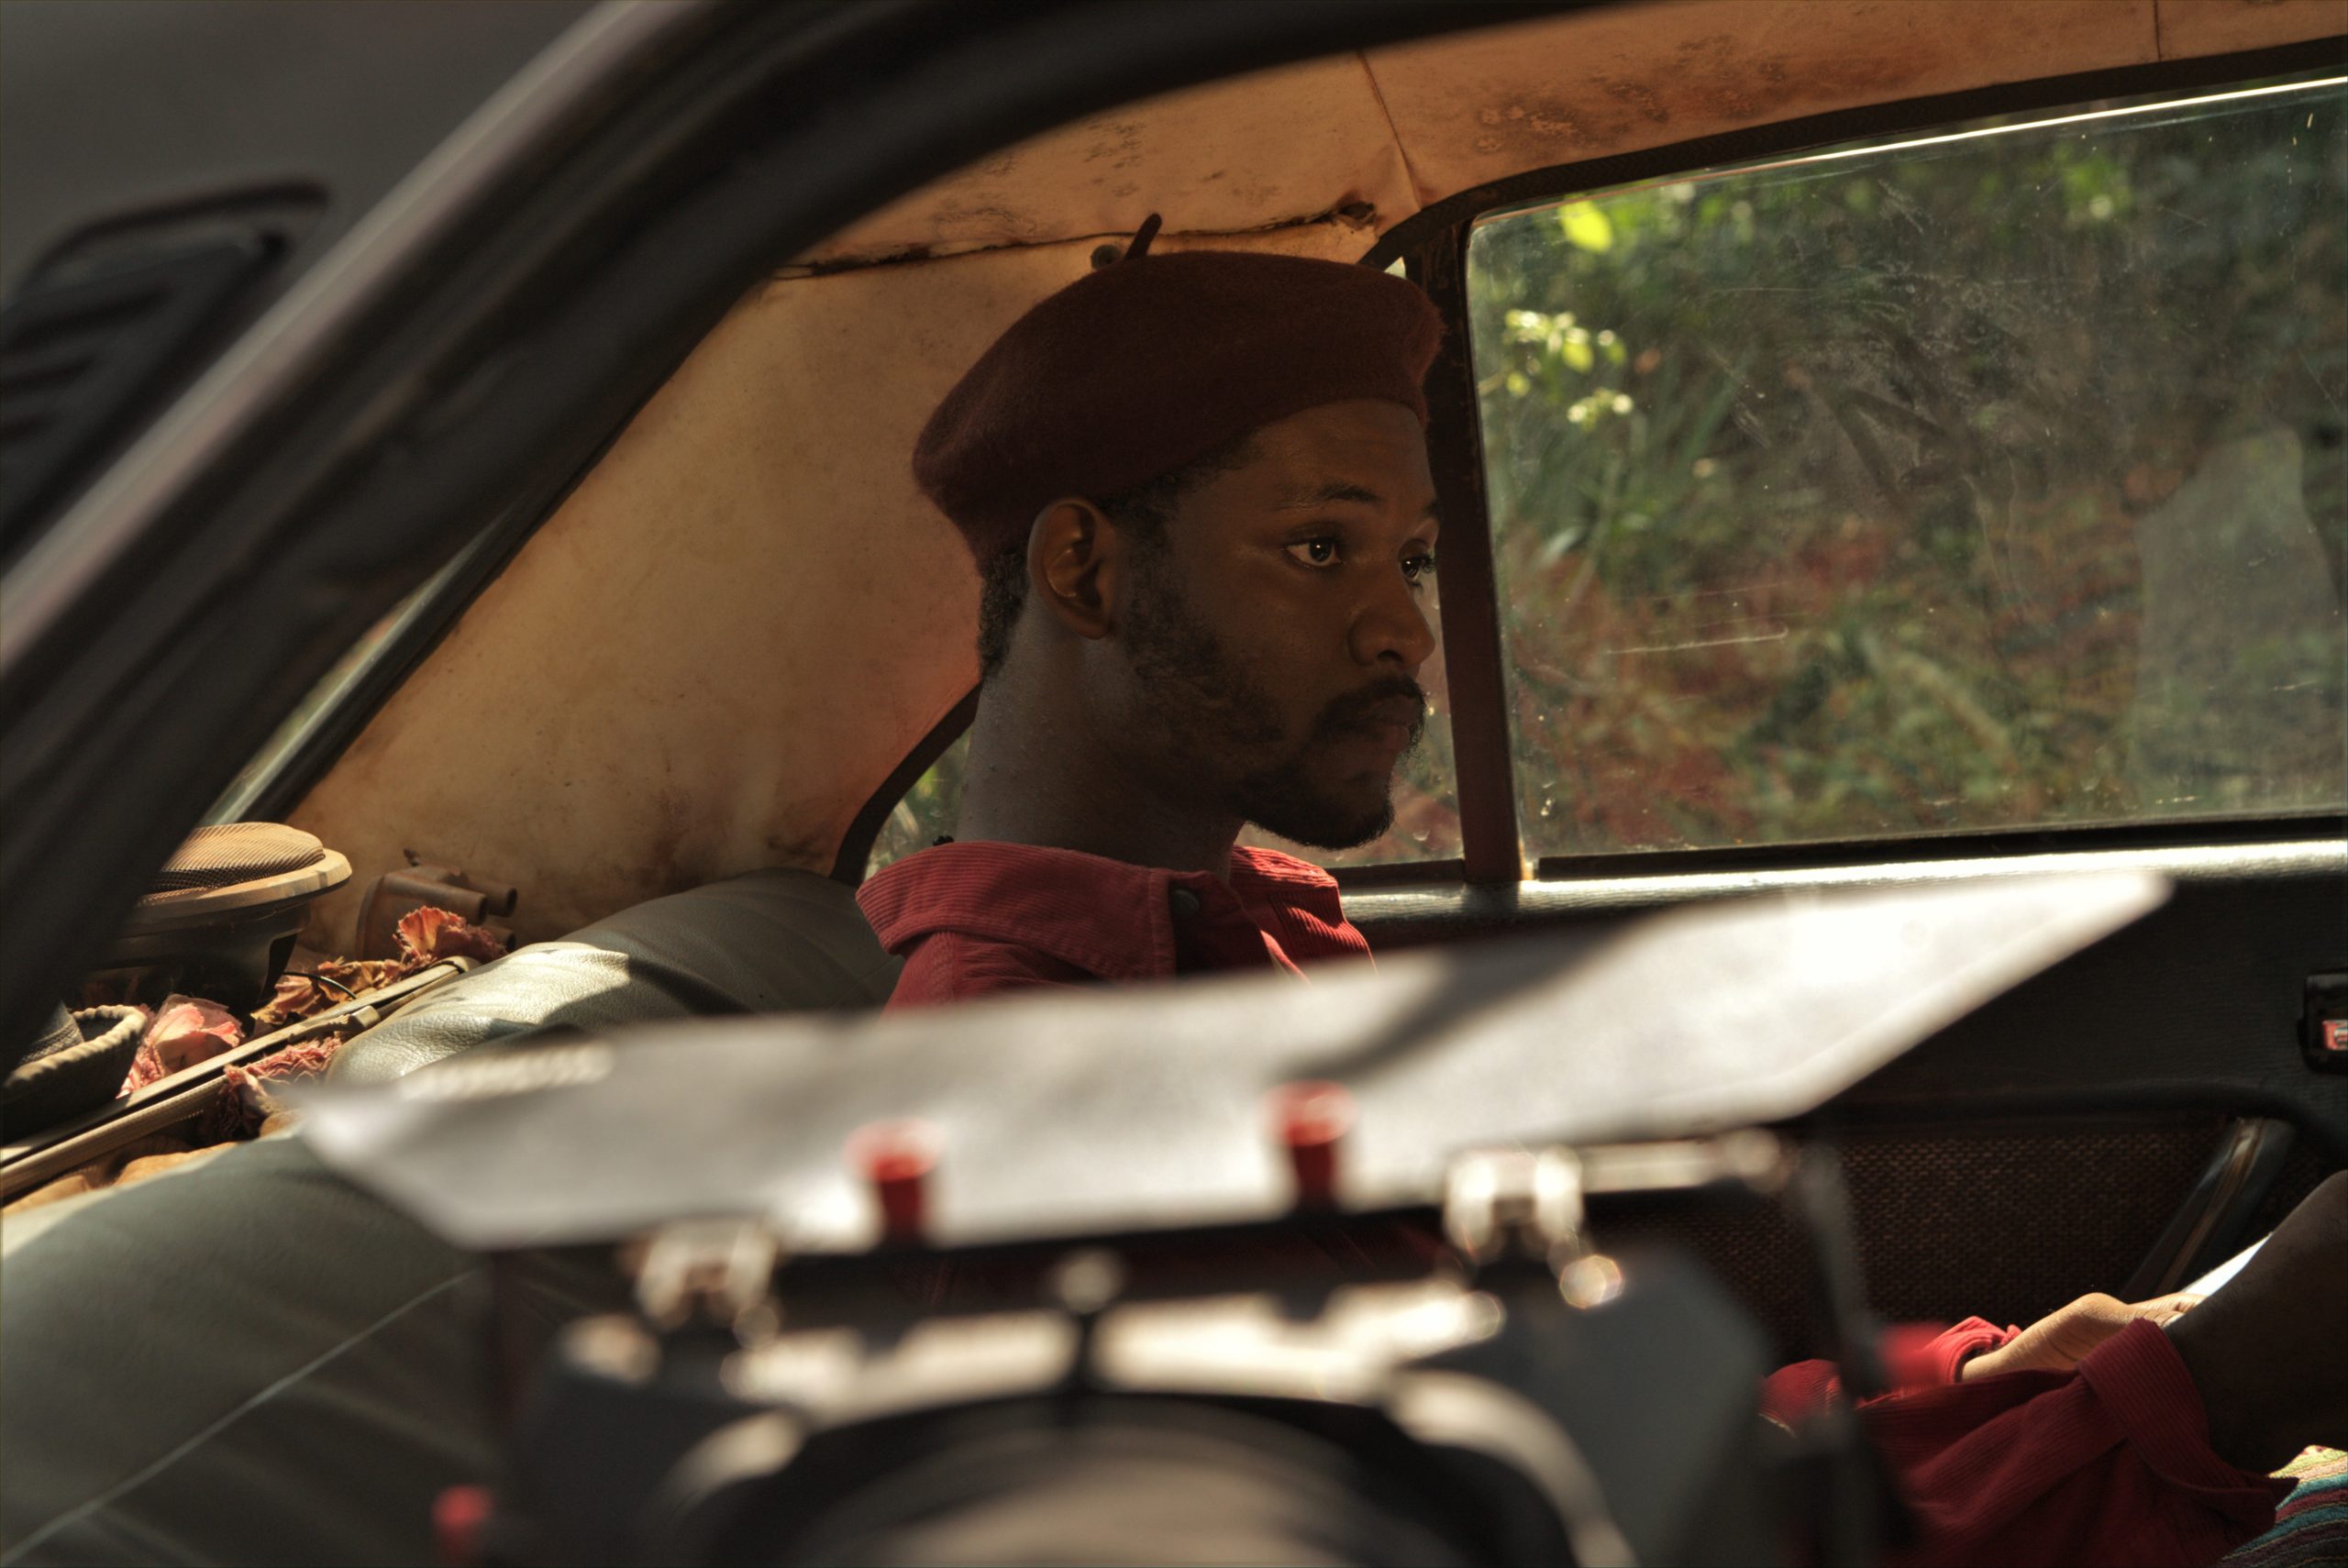 Image description: Kelechi Michaels in the film Country Love. The character, Kambili is sitting in the backseat of a car. There is a trunk beside him. He is dressed in an orange shirt and wearing a maroon beret. 